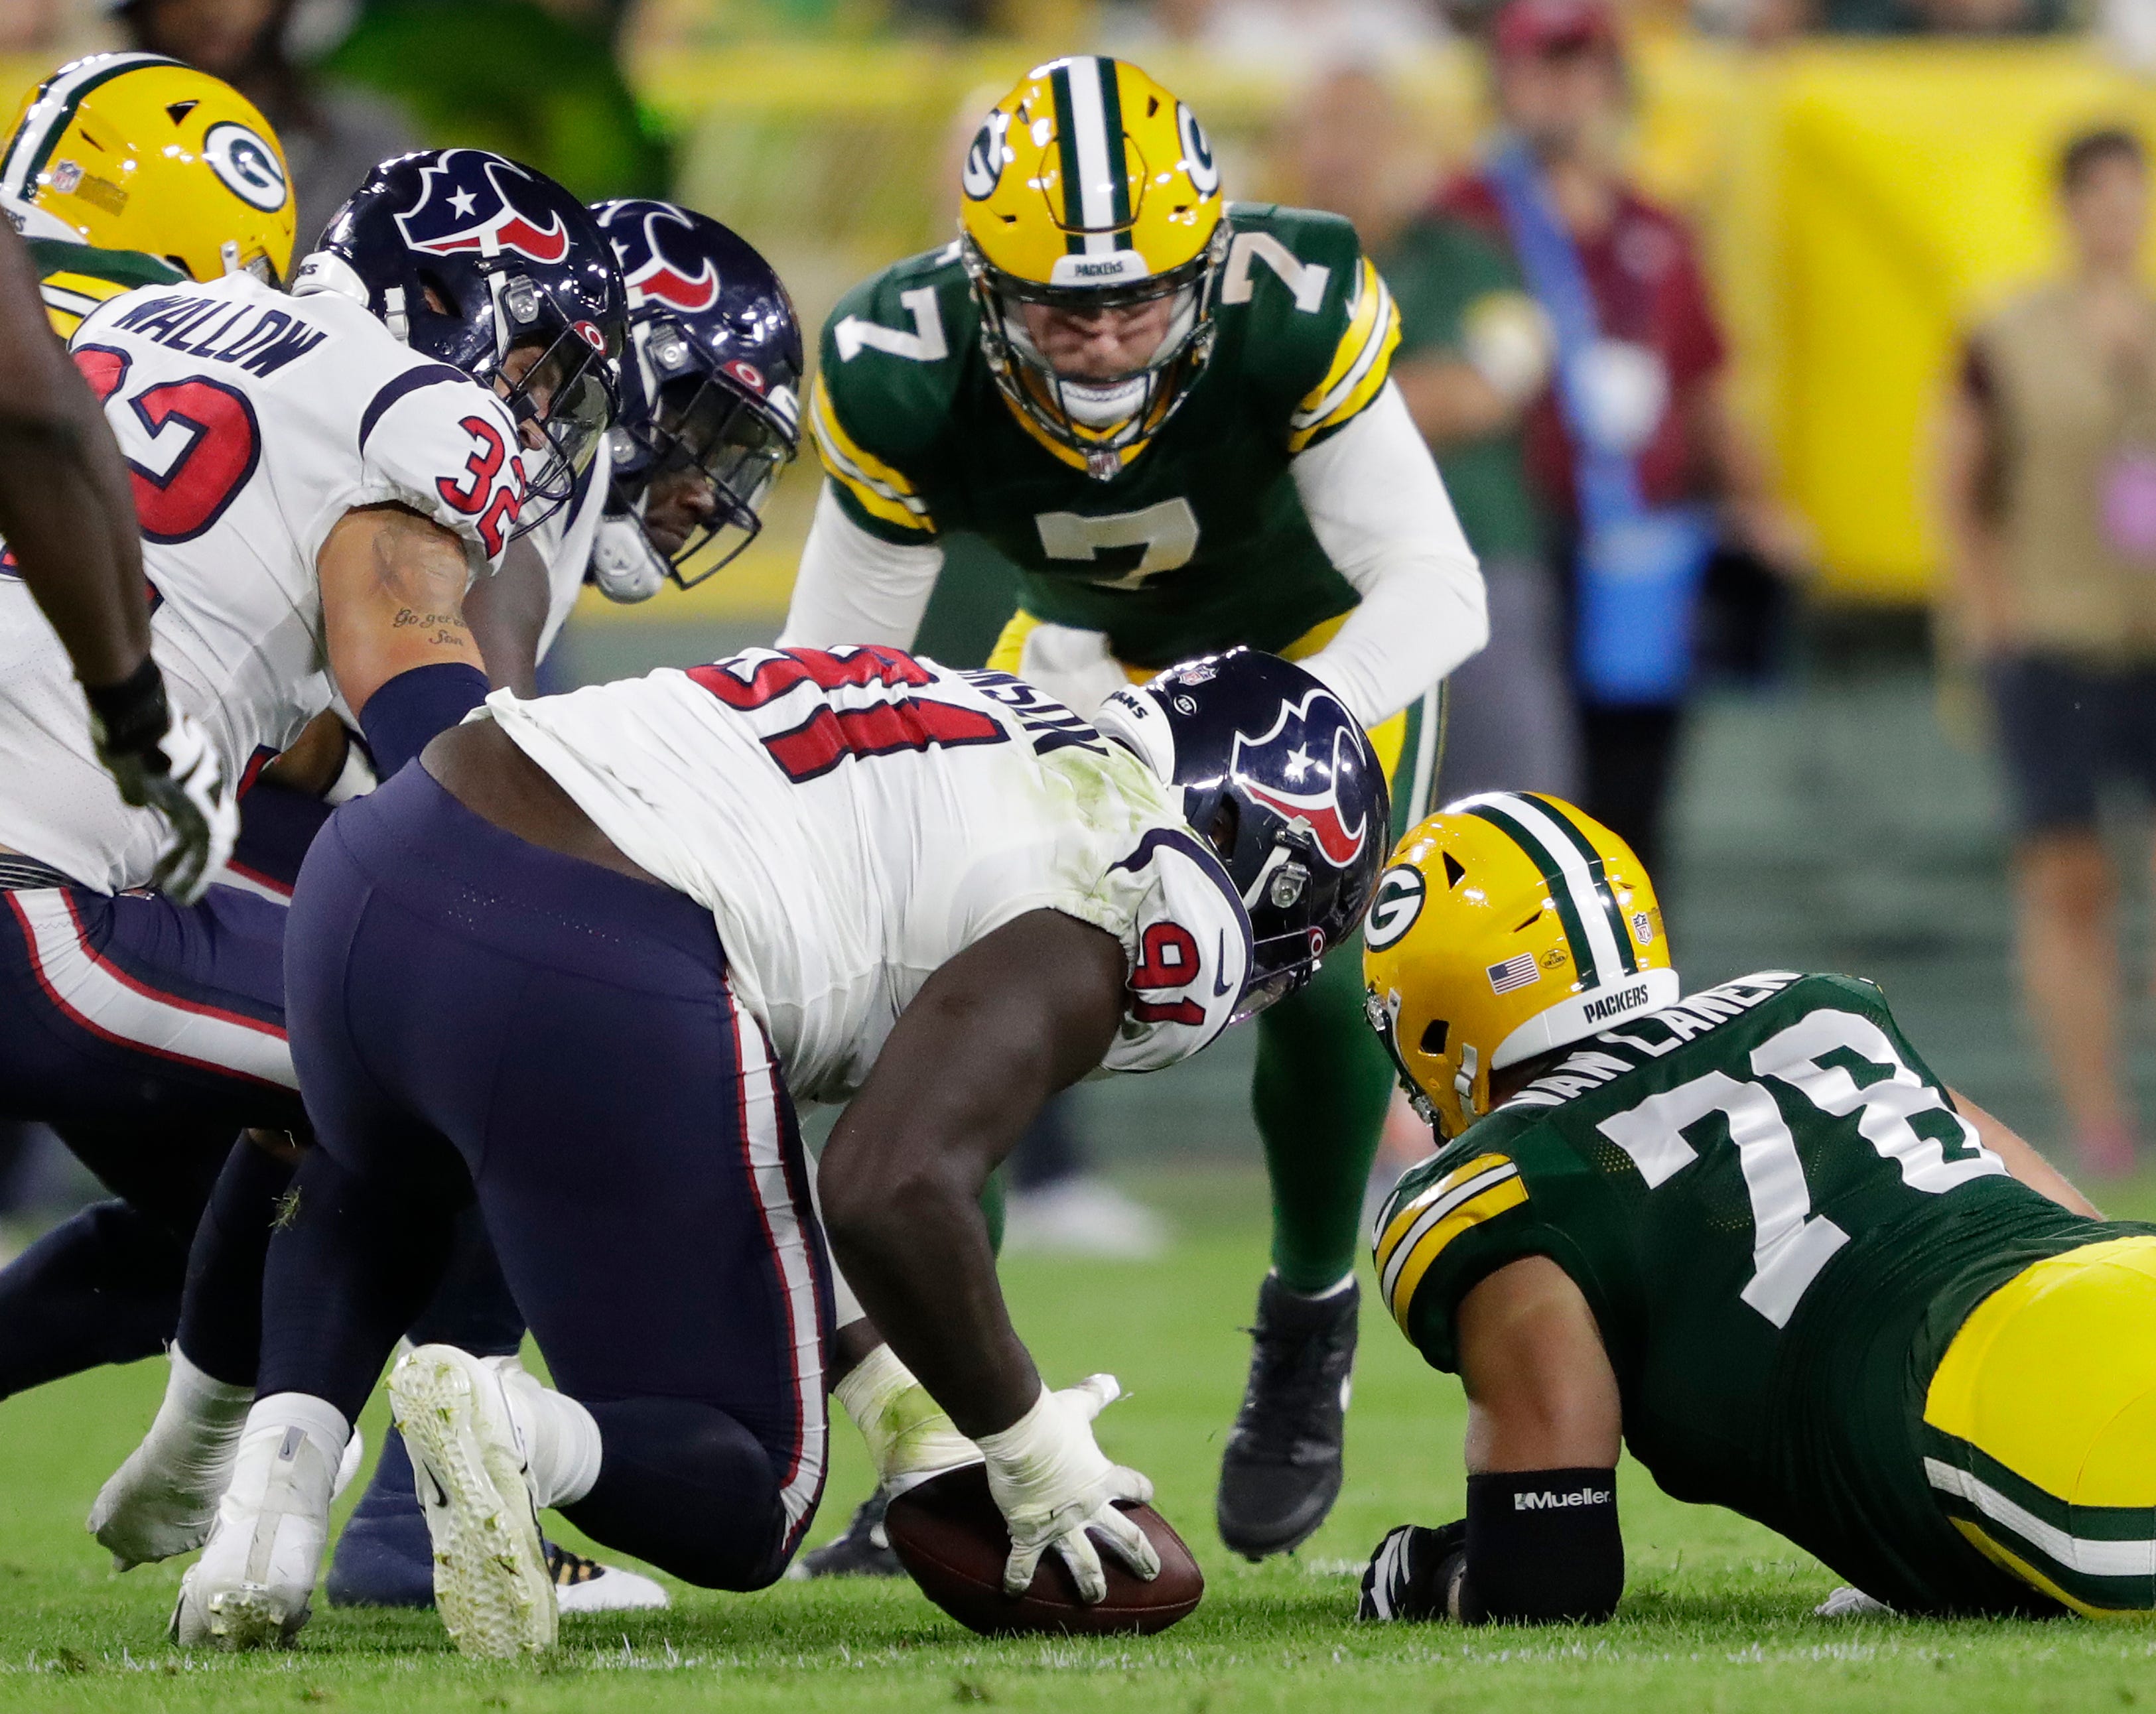 Houston Texans defensive tackle Jaleel Johnson (91) recovers a fumble against Green Bay Packers quarterback Kurt Benkert (7) and offensive tackle Cole Van Lanen (78) during their football game  at Lambeau Field in Green Bay.